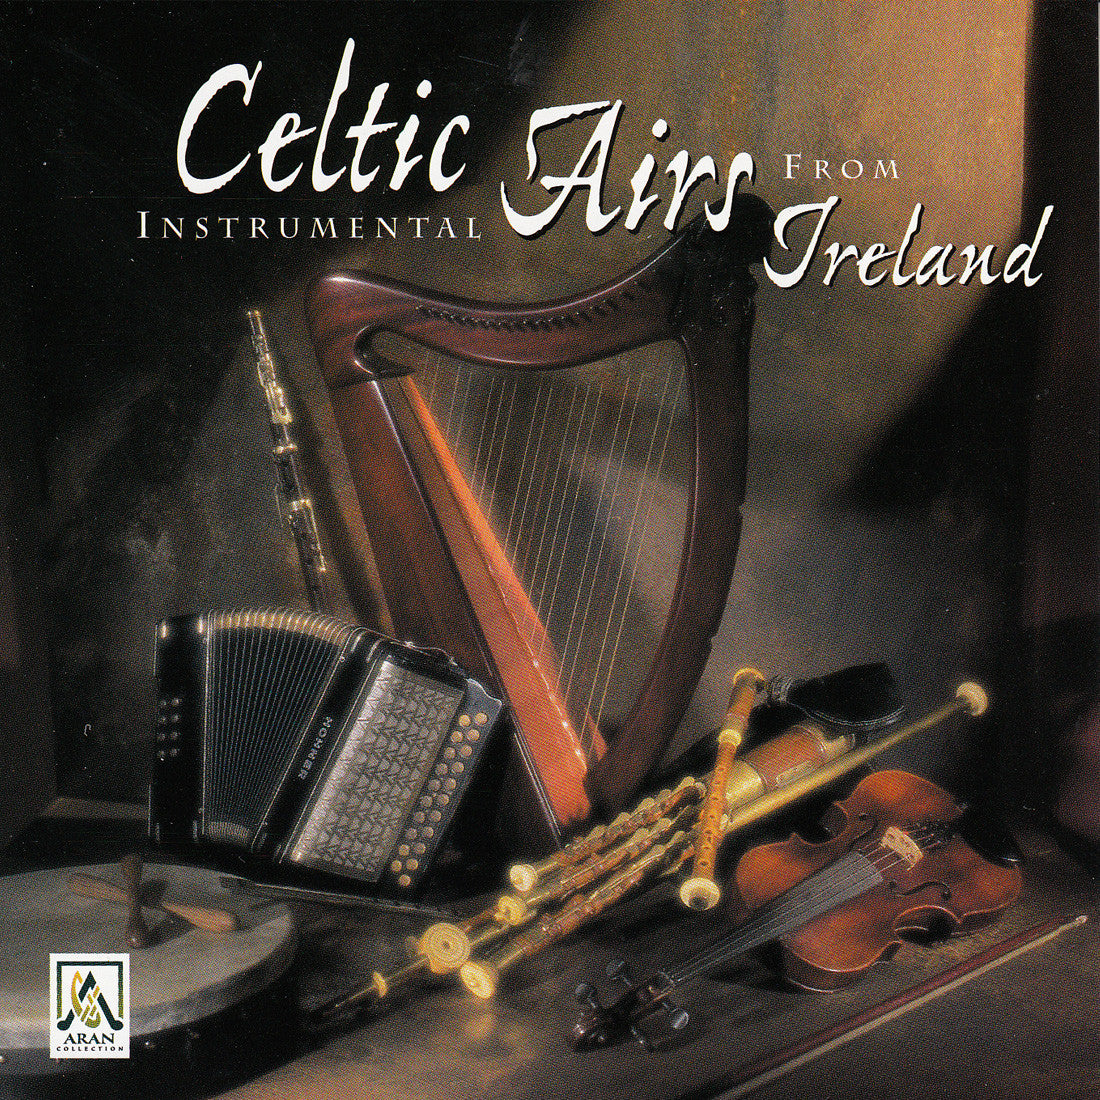 Celtic Instrumental Airs From Ireland - The Celtic Orchestra [CD]